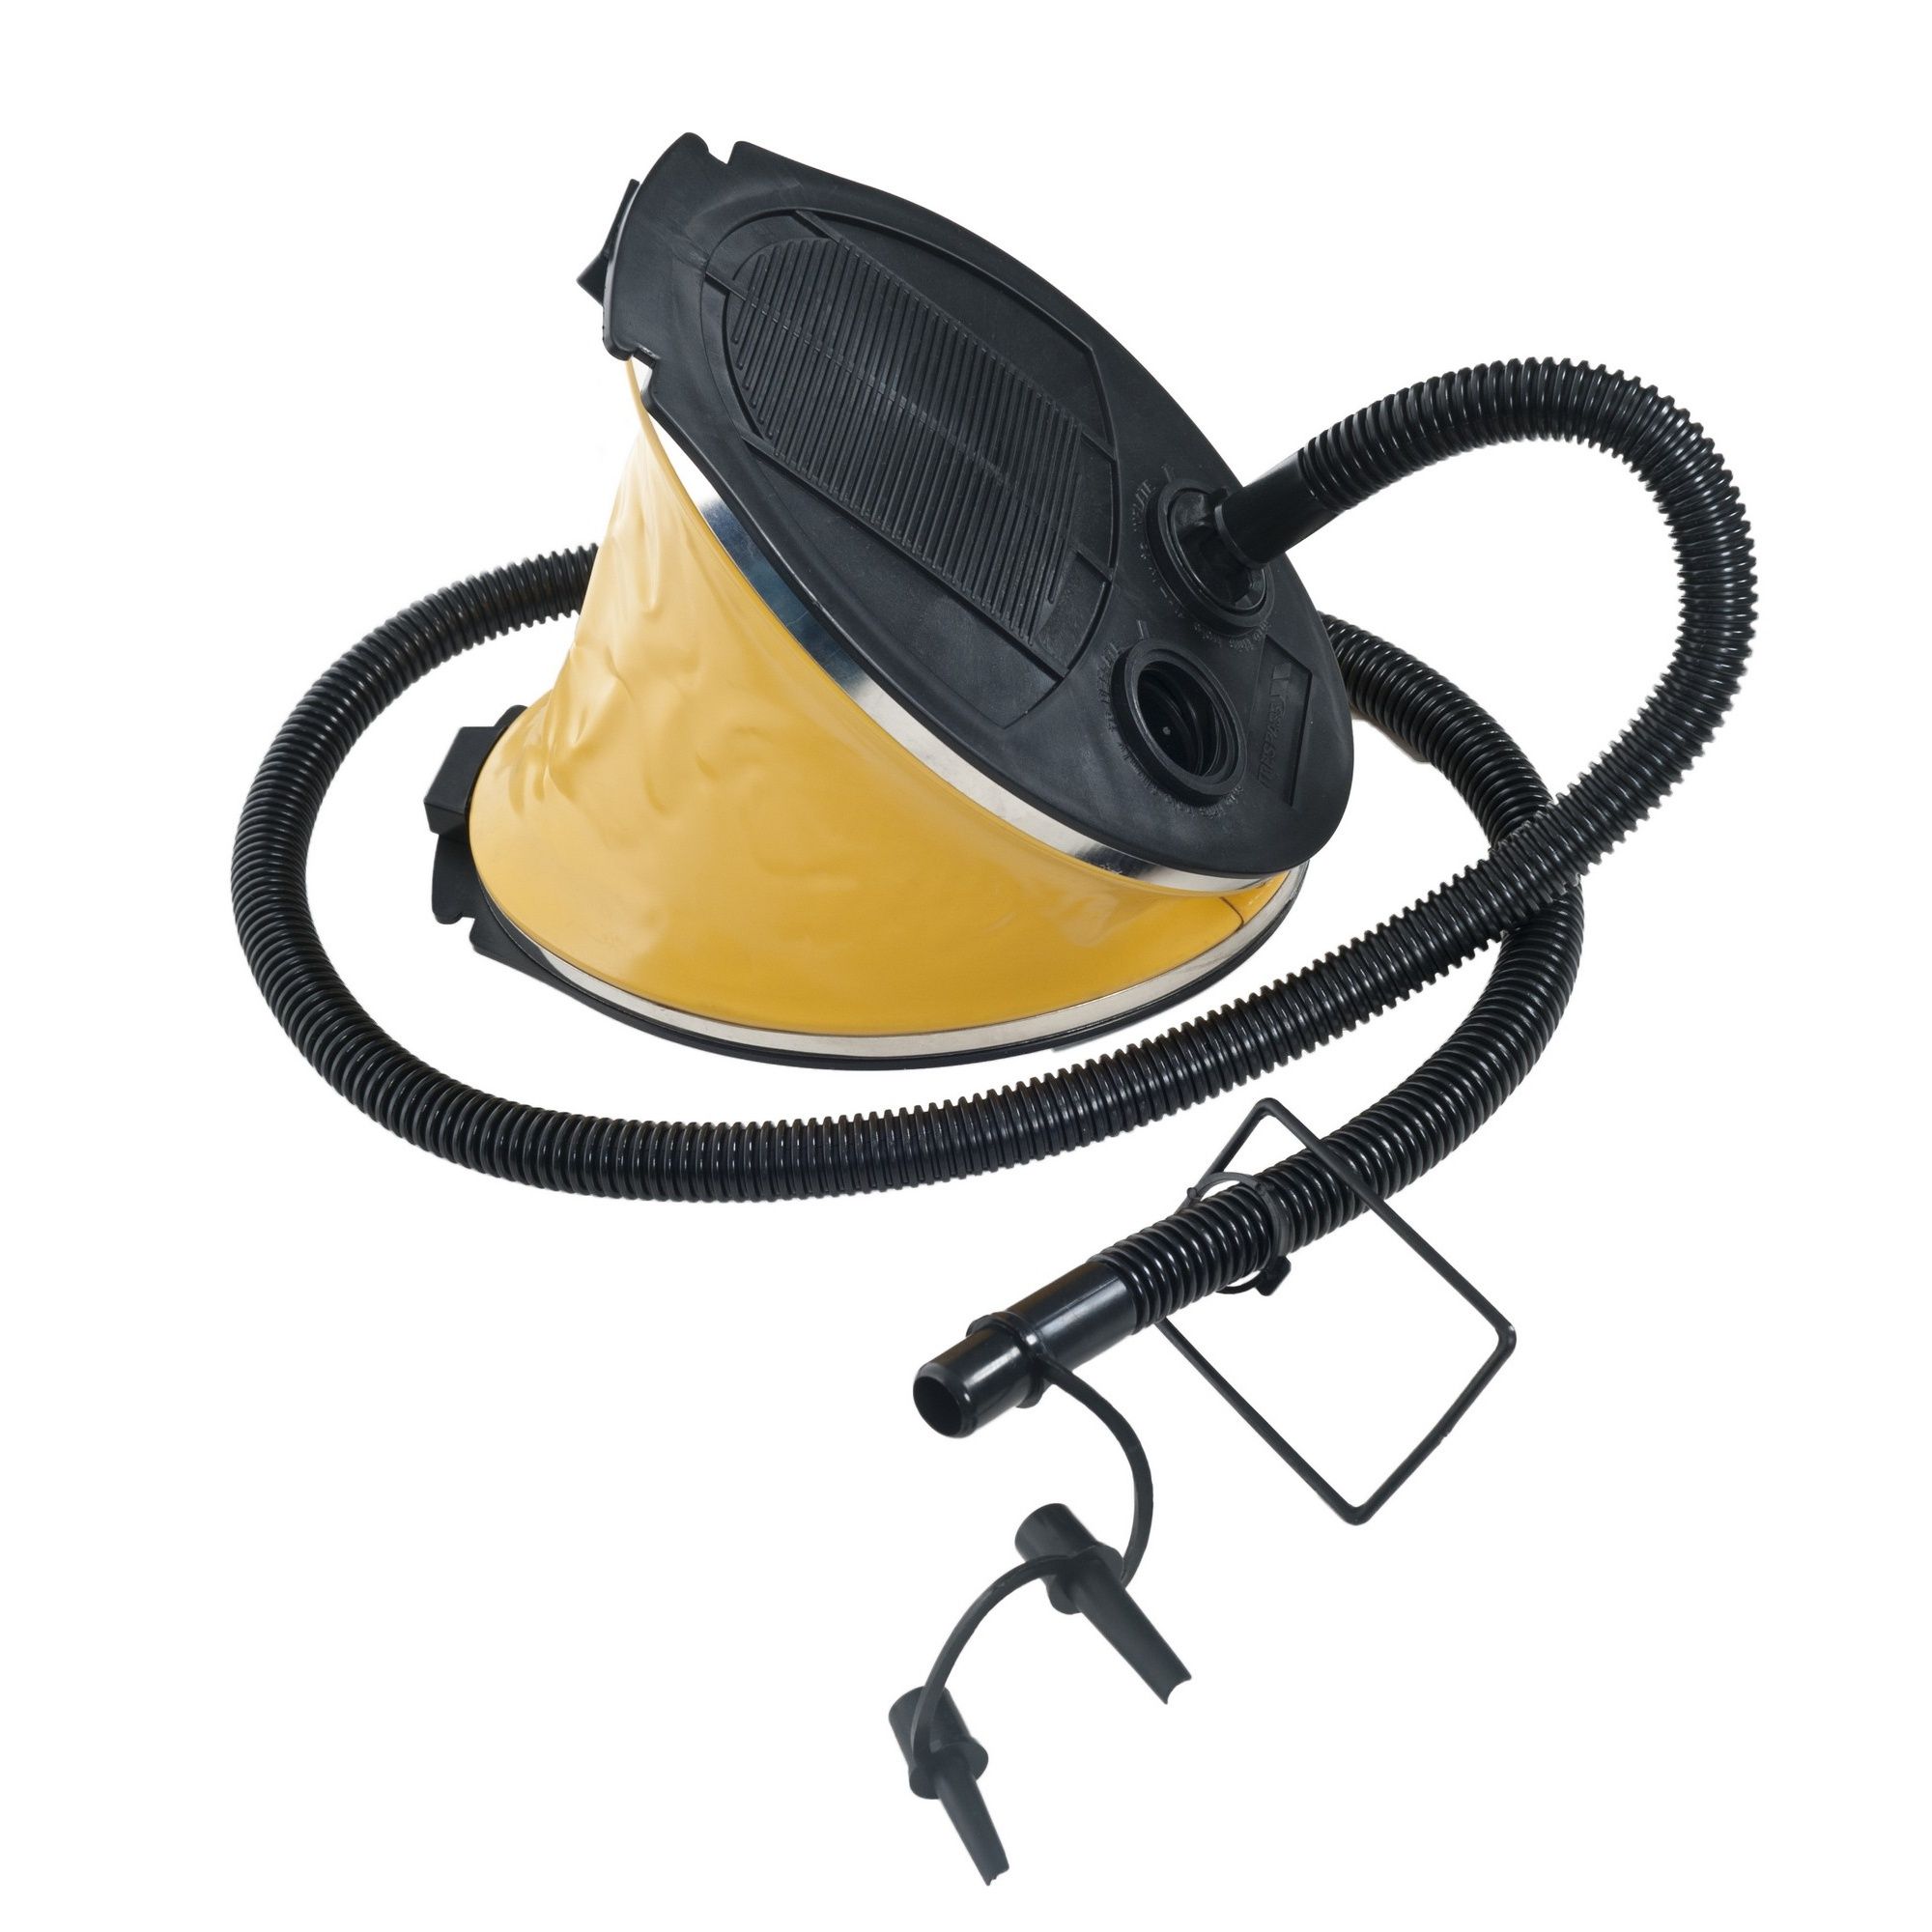 Foot pump. Large 3 litre capacity. 3 Valve adapters. Durable plastic. For air mattresses & inflatables.